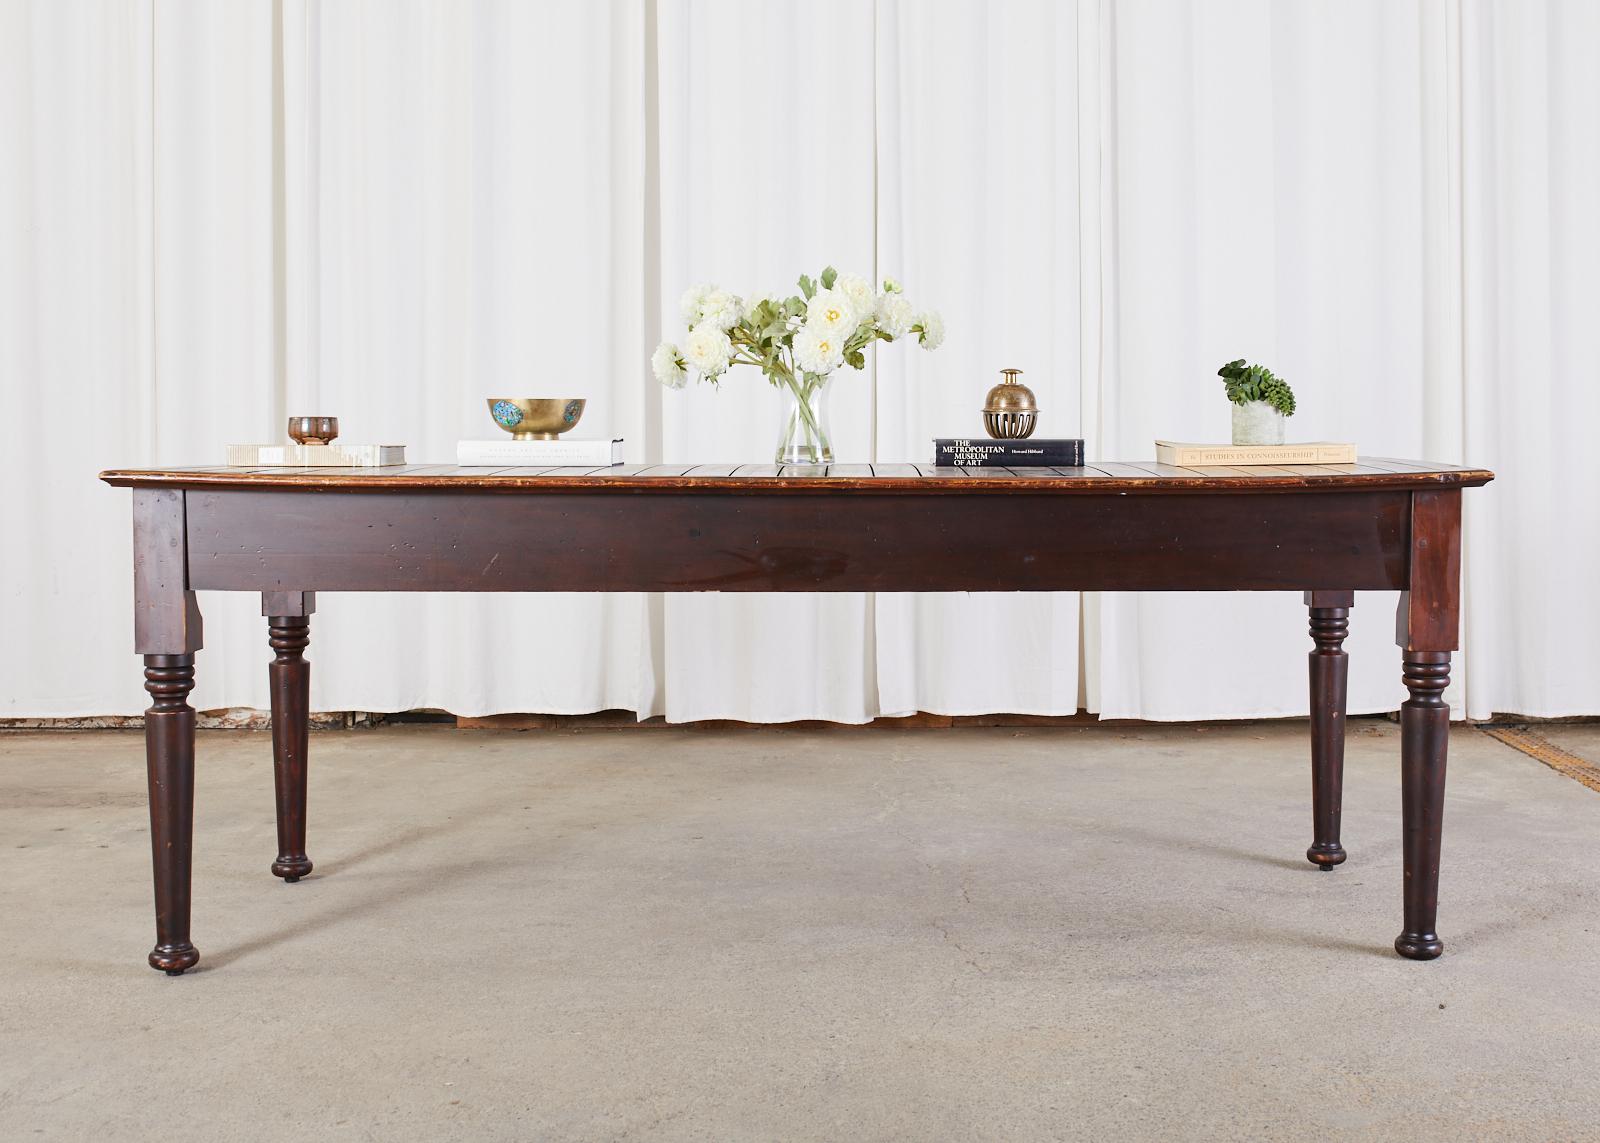 Bespoke American farmhouse work table, display table, dining table or console made by Crow Works for Abercrombie and Fitch. The large table features a plank top with a framed edge. The top is supported by thick, turned legs ending with round feet.